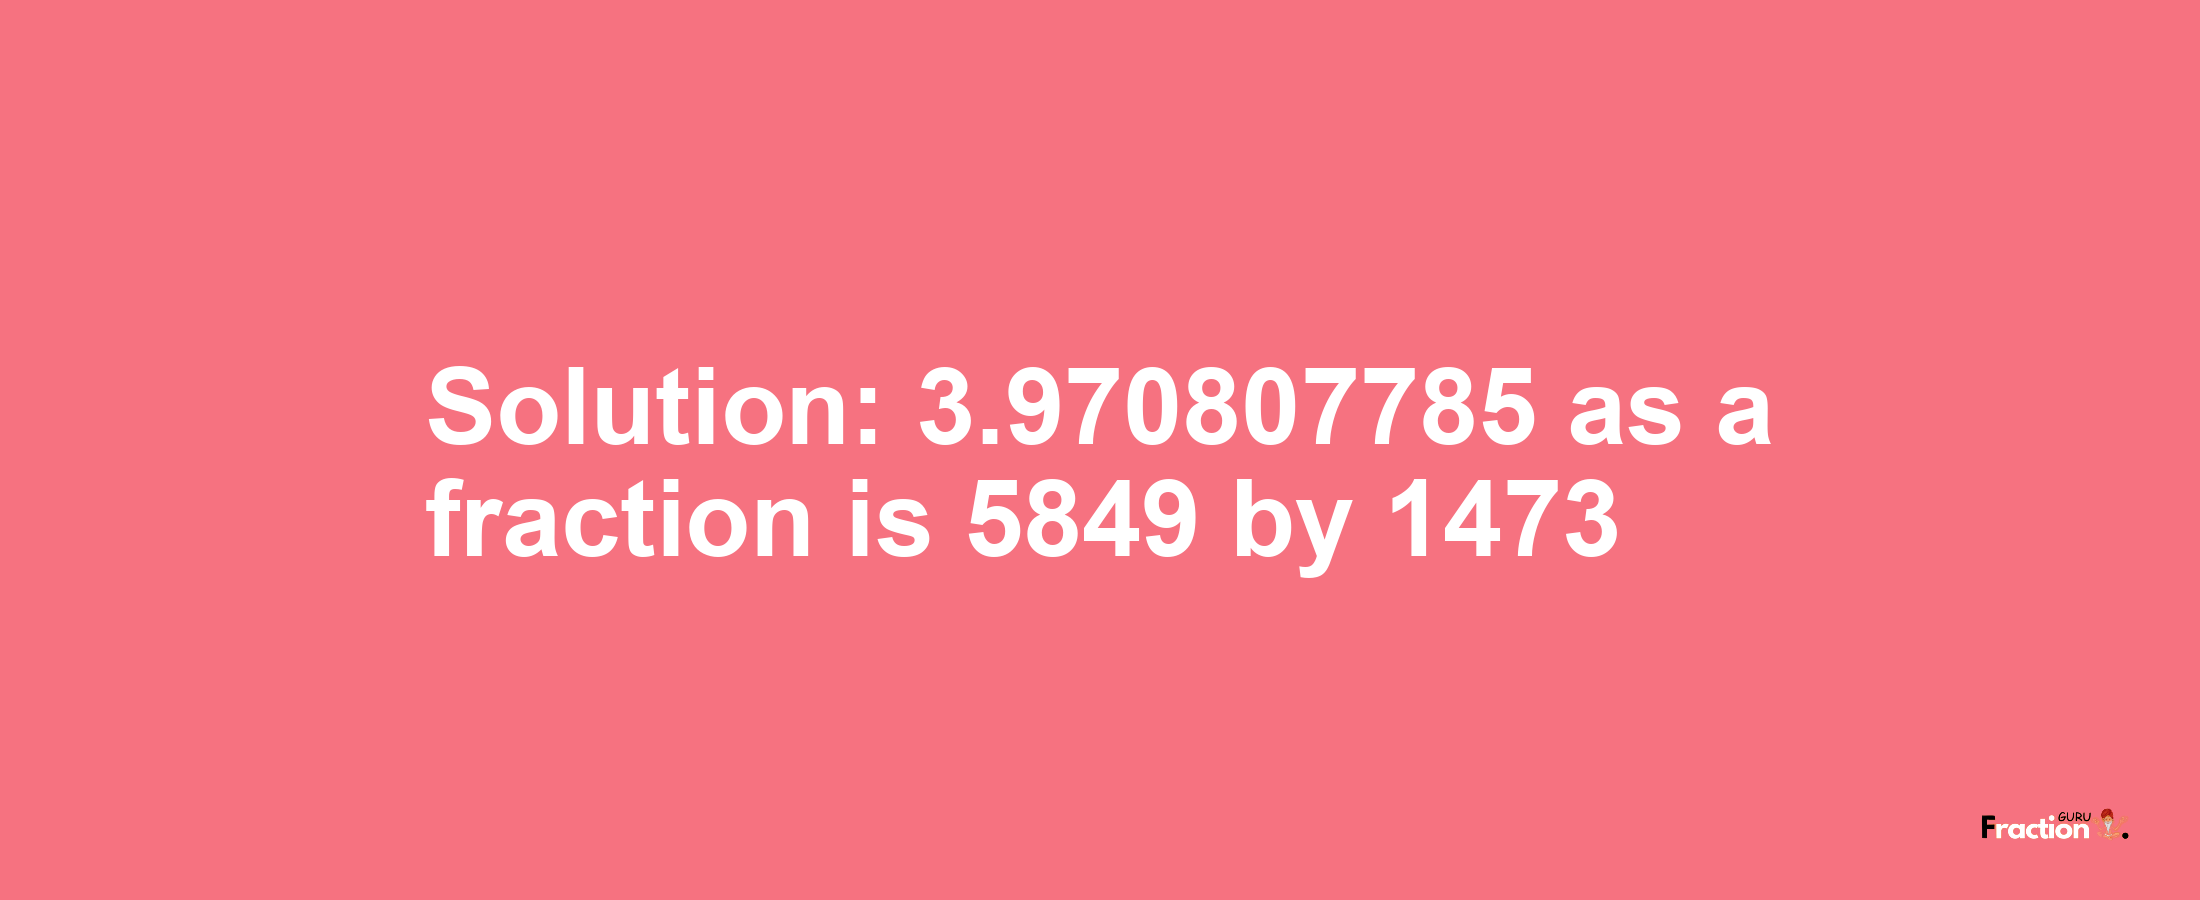 Solution:3.970807785 as a fraction is 5849/1473